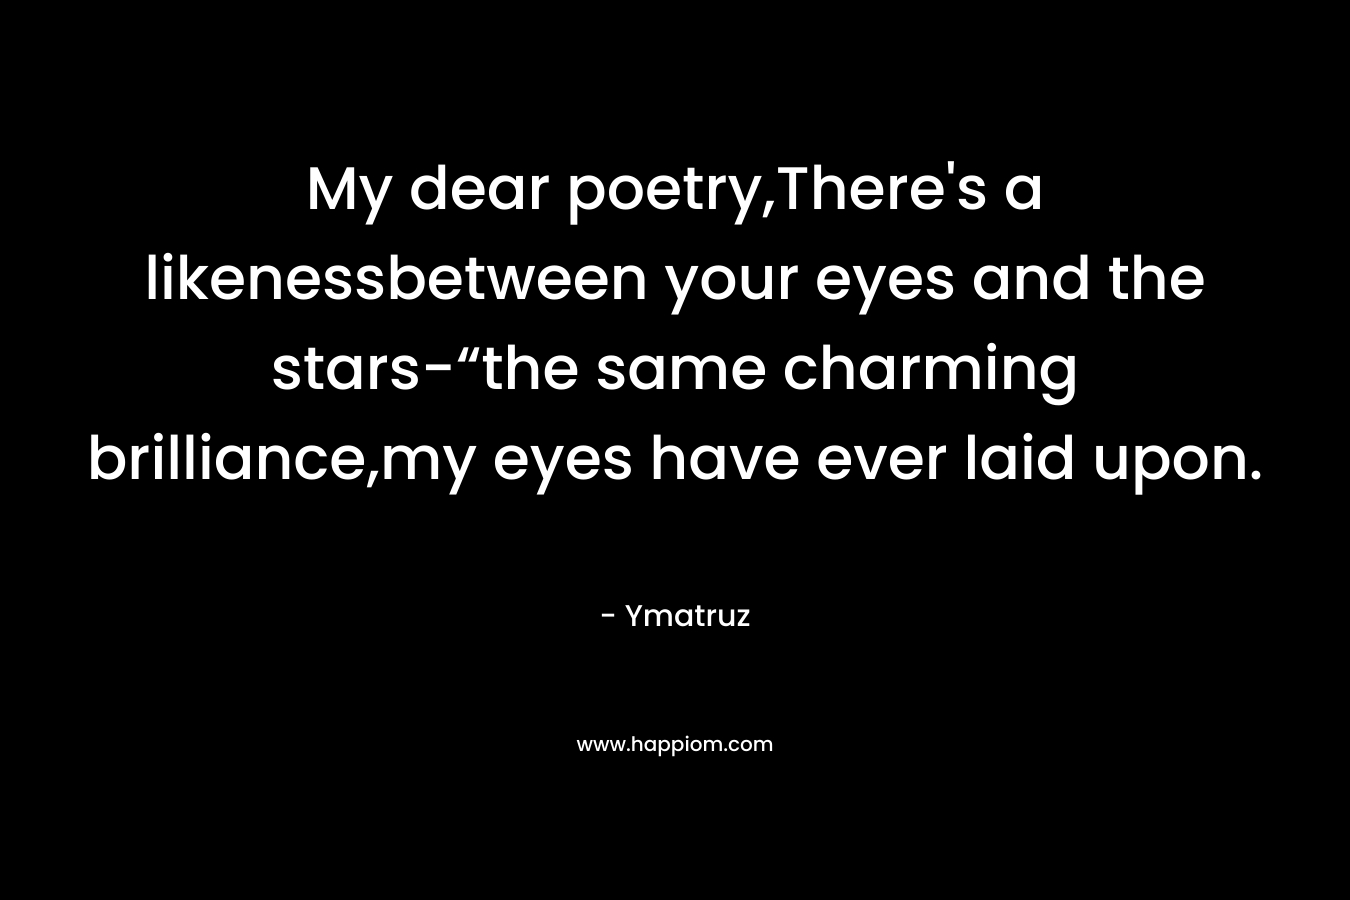 My dear poetry,There’s a likenessbetween your eyes and the stars-“the same charming brilliance,my eyes have ever laid upon. – Ymatruz